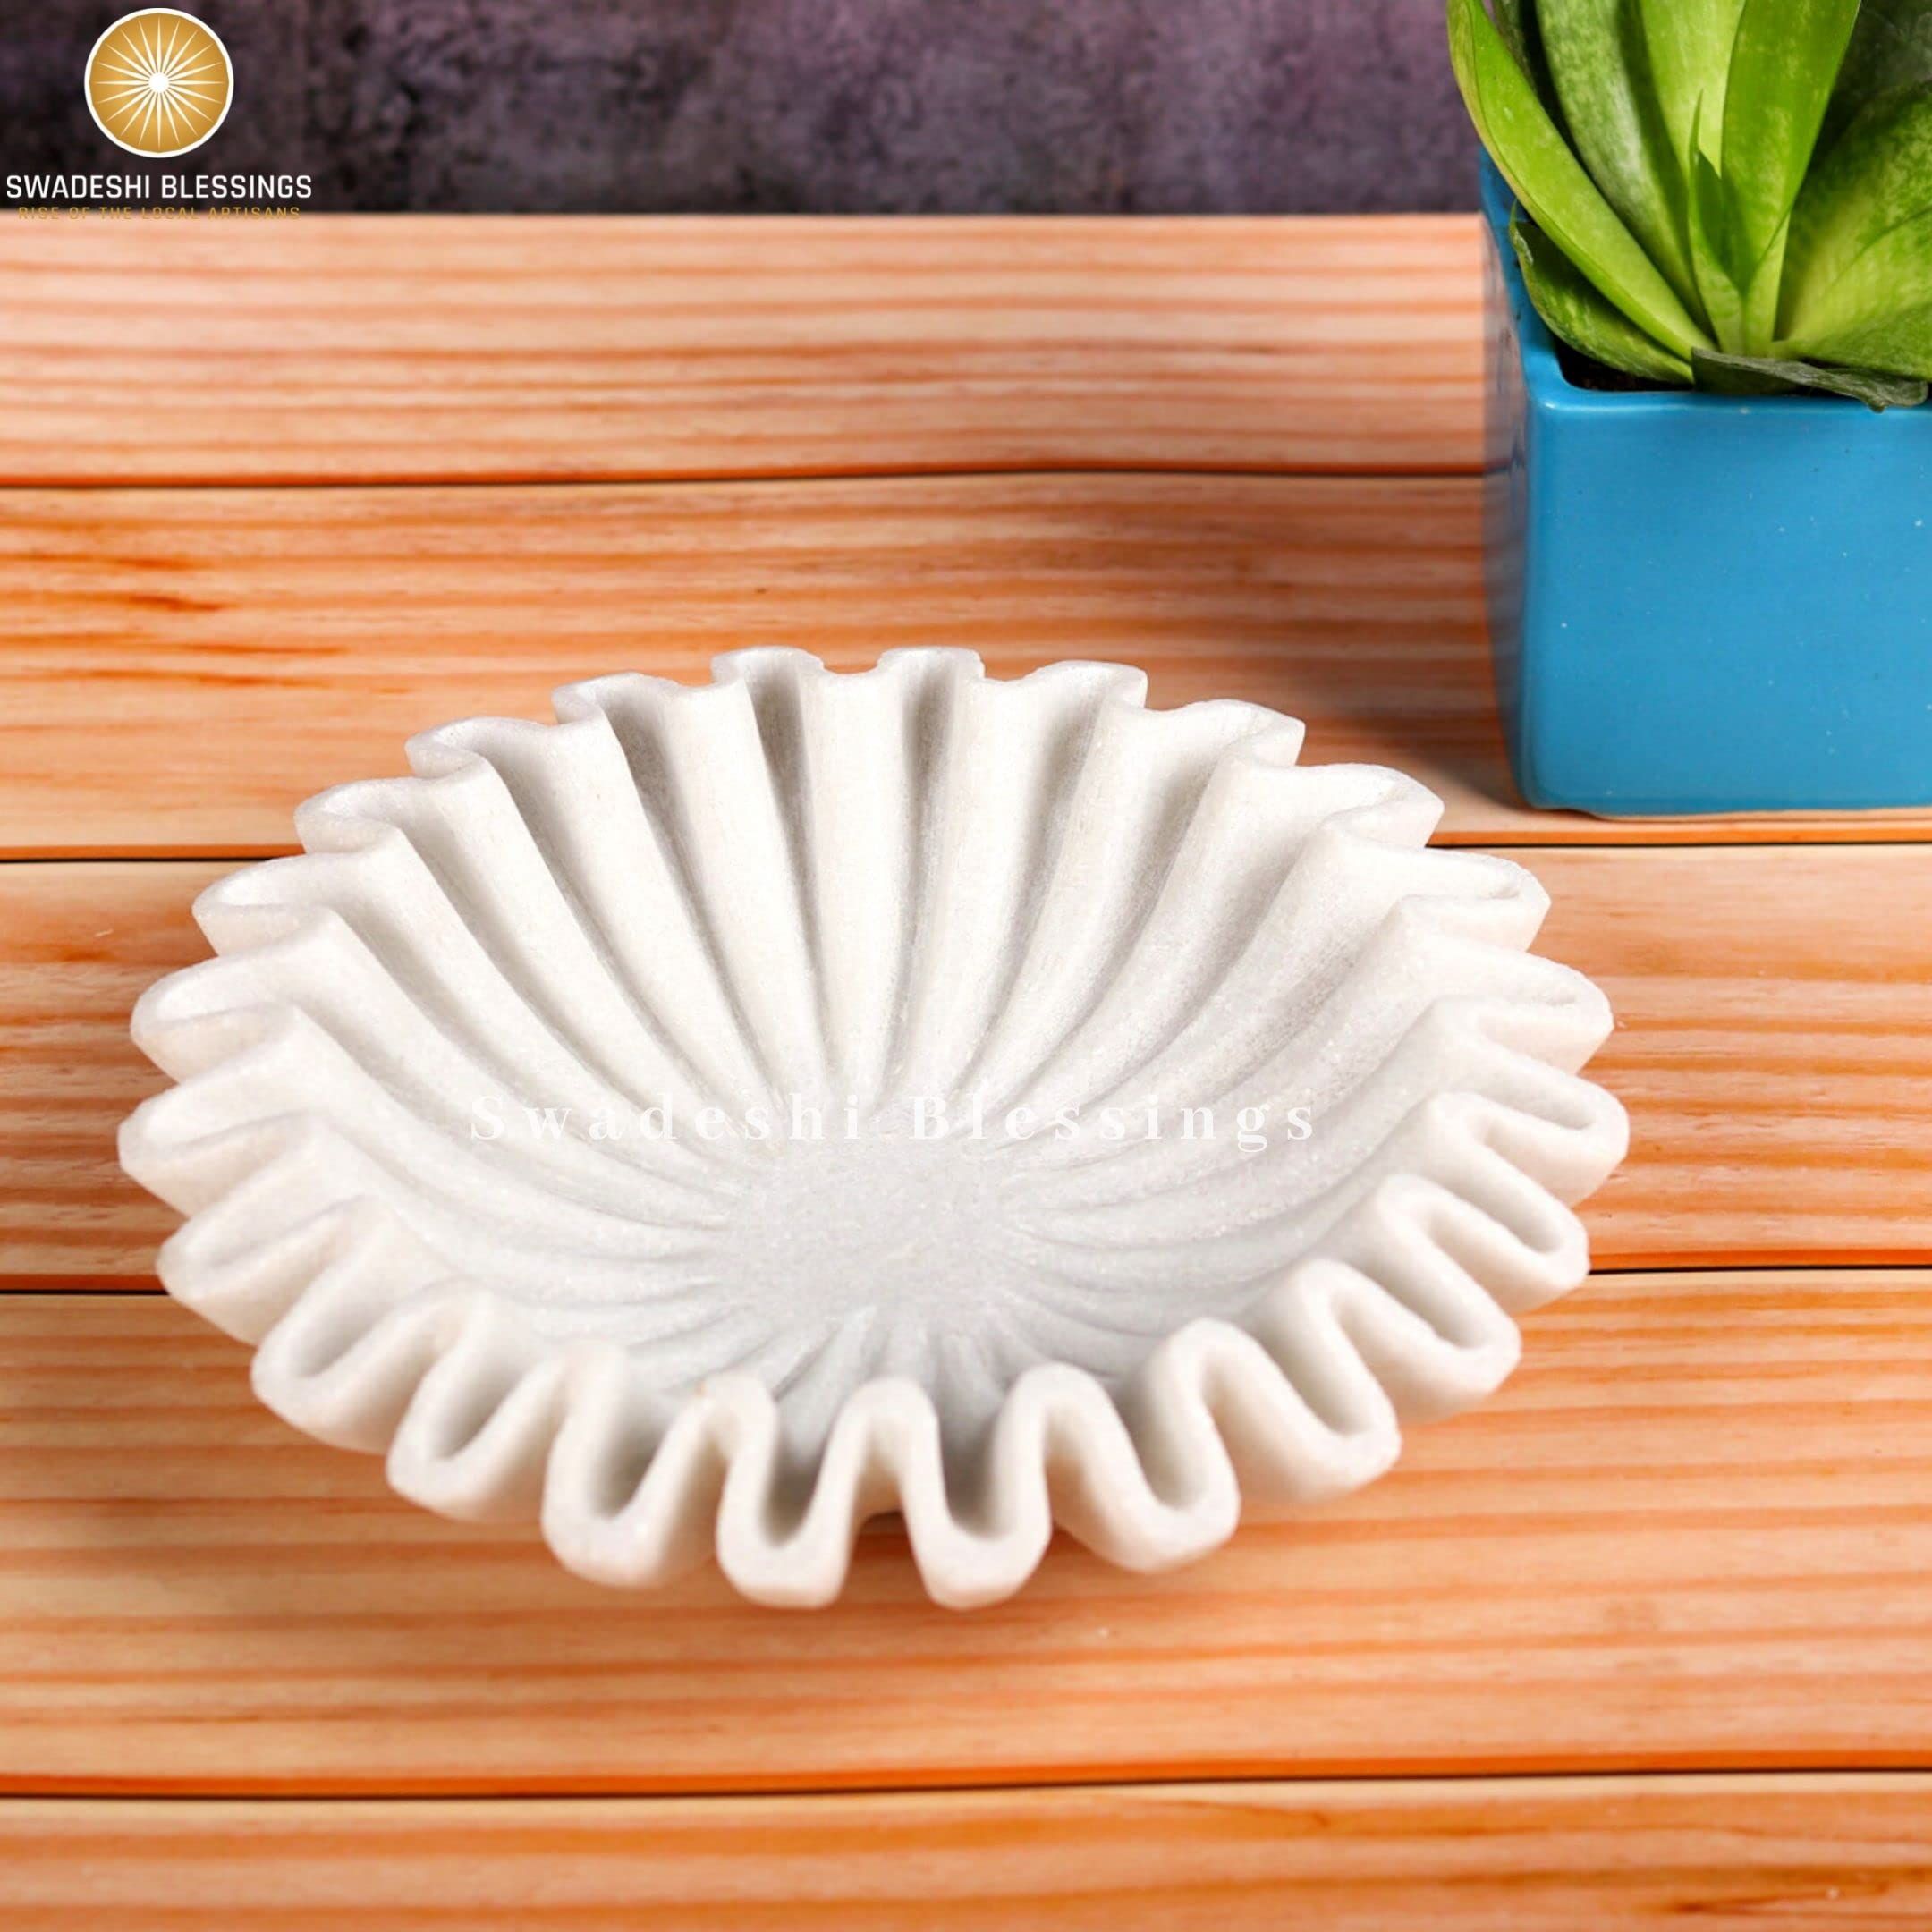 SWADESHI BLESSINGS HandCrafted Marble Ruffle Bowl/5 inches Amazon Home Decor Finds Amazon Favorites | Amazon (US)